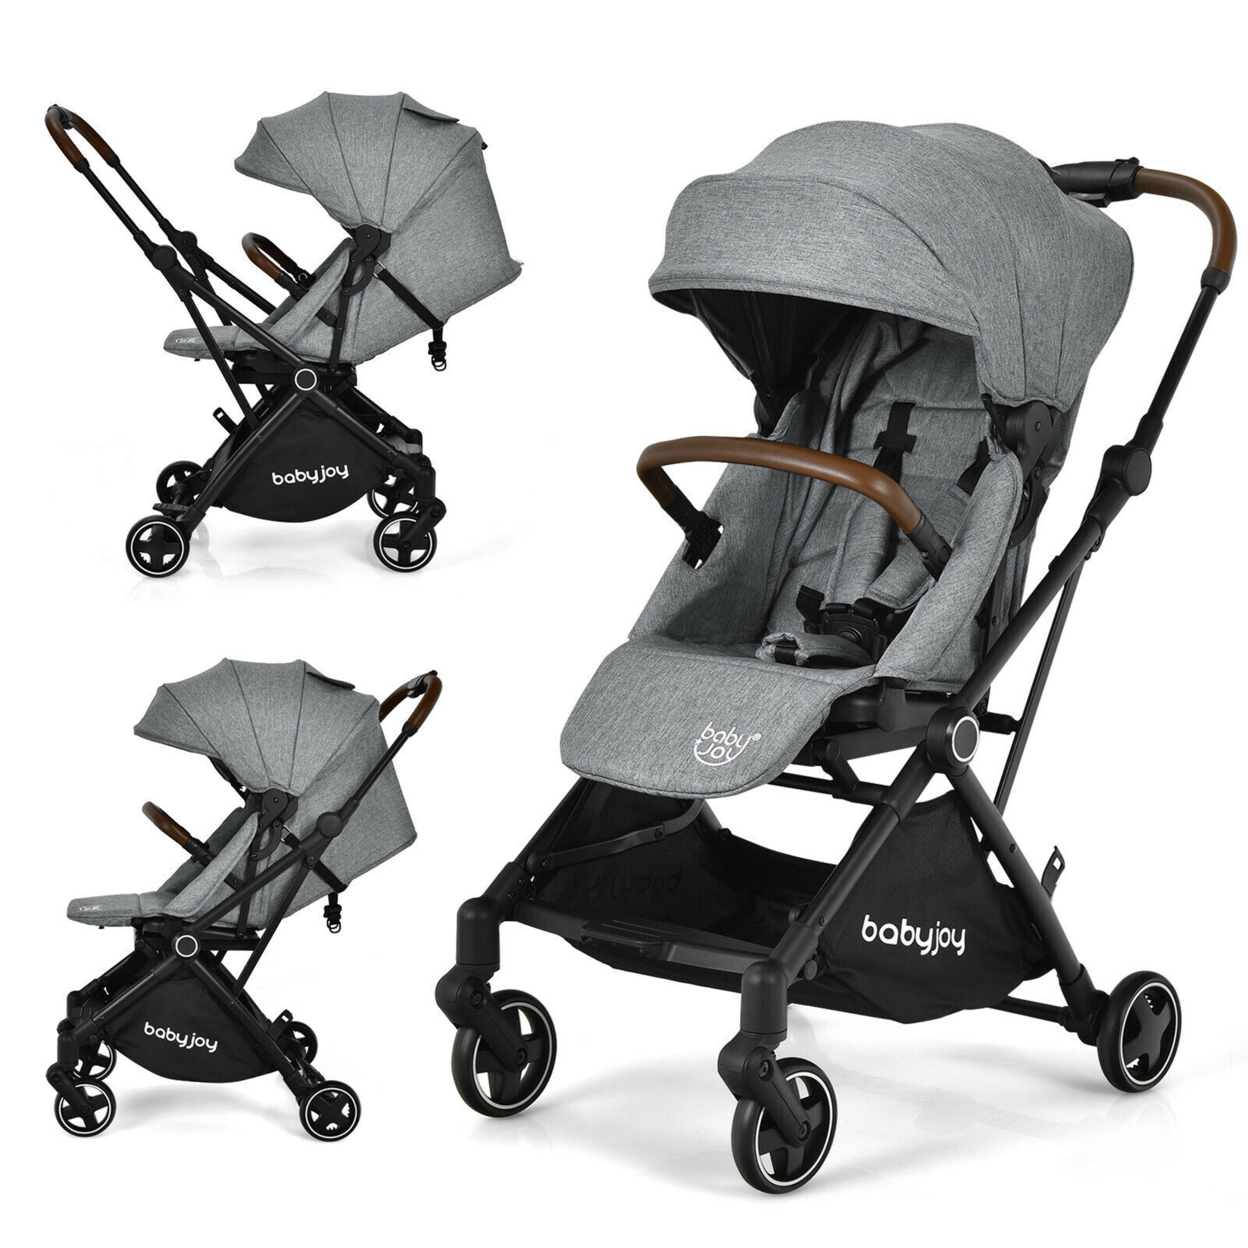 2-in-1 Convertible Baby Stroller Pushchair Aluminum W/ Adjustable Canopy - Grey